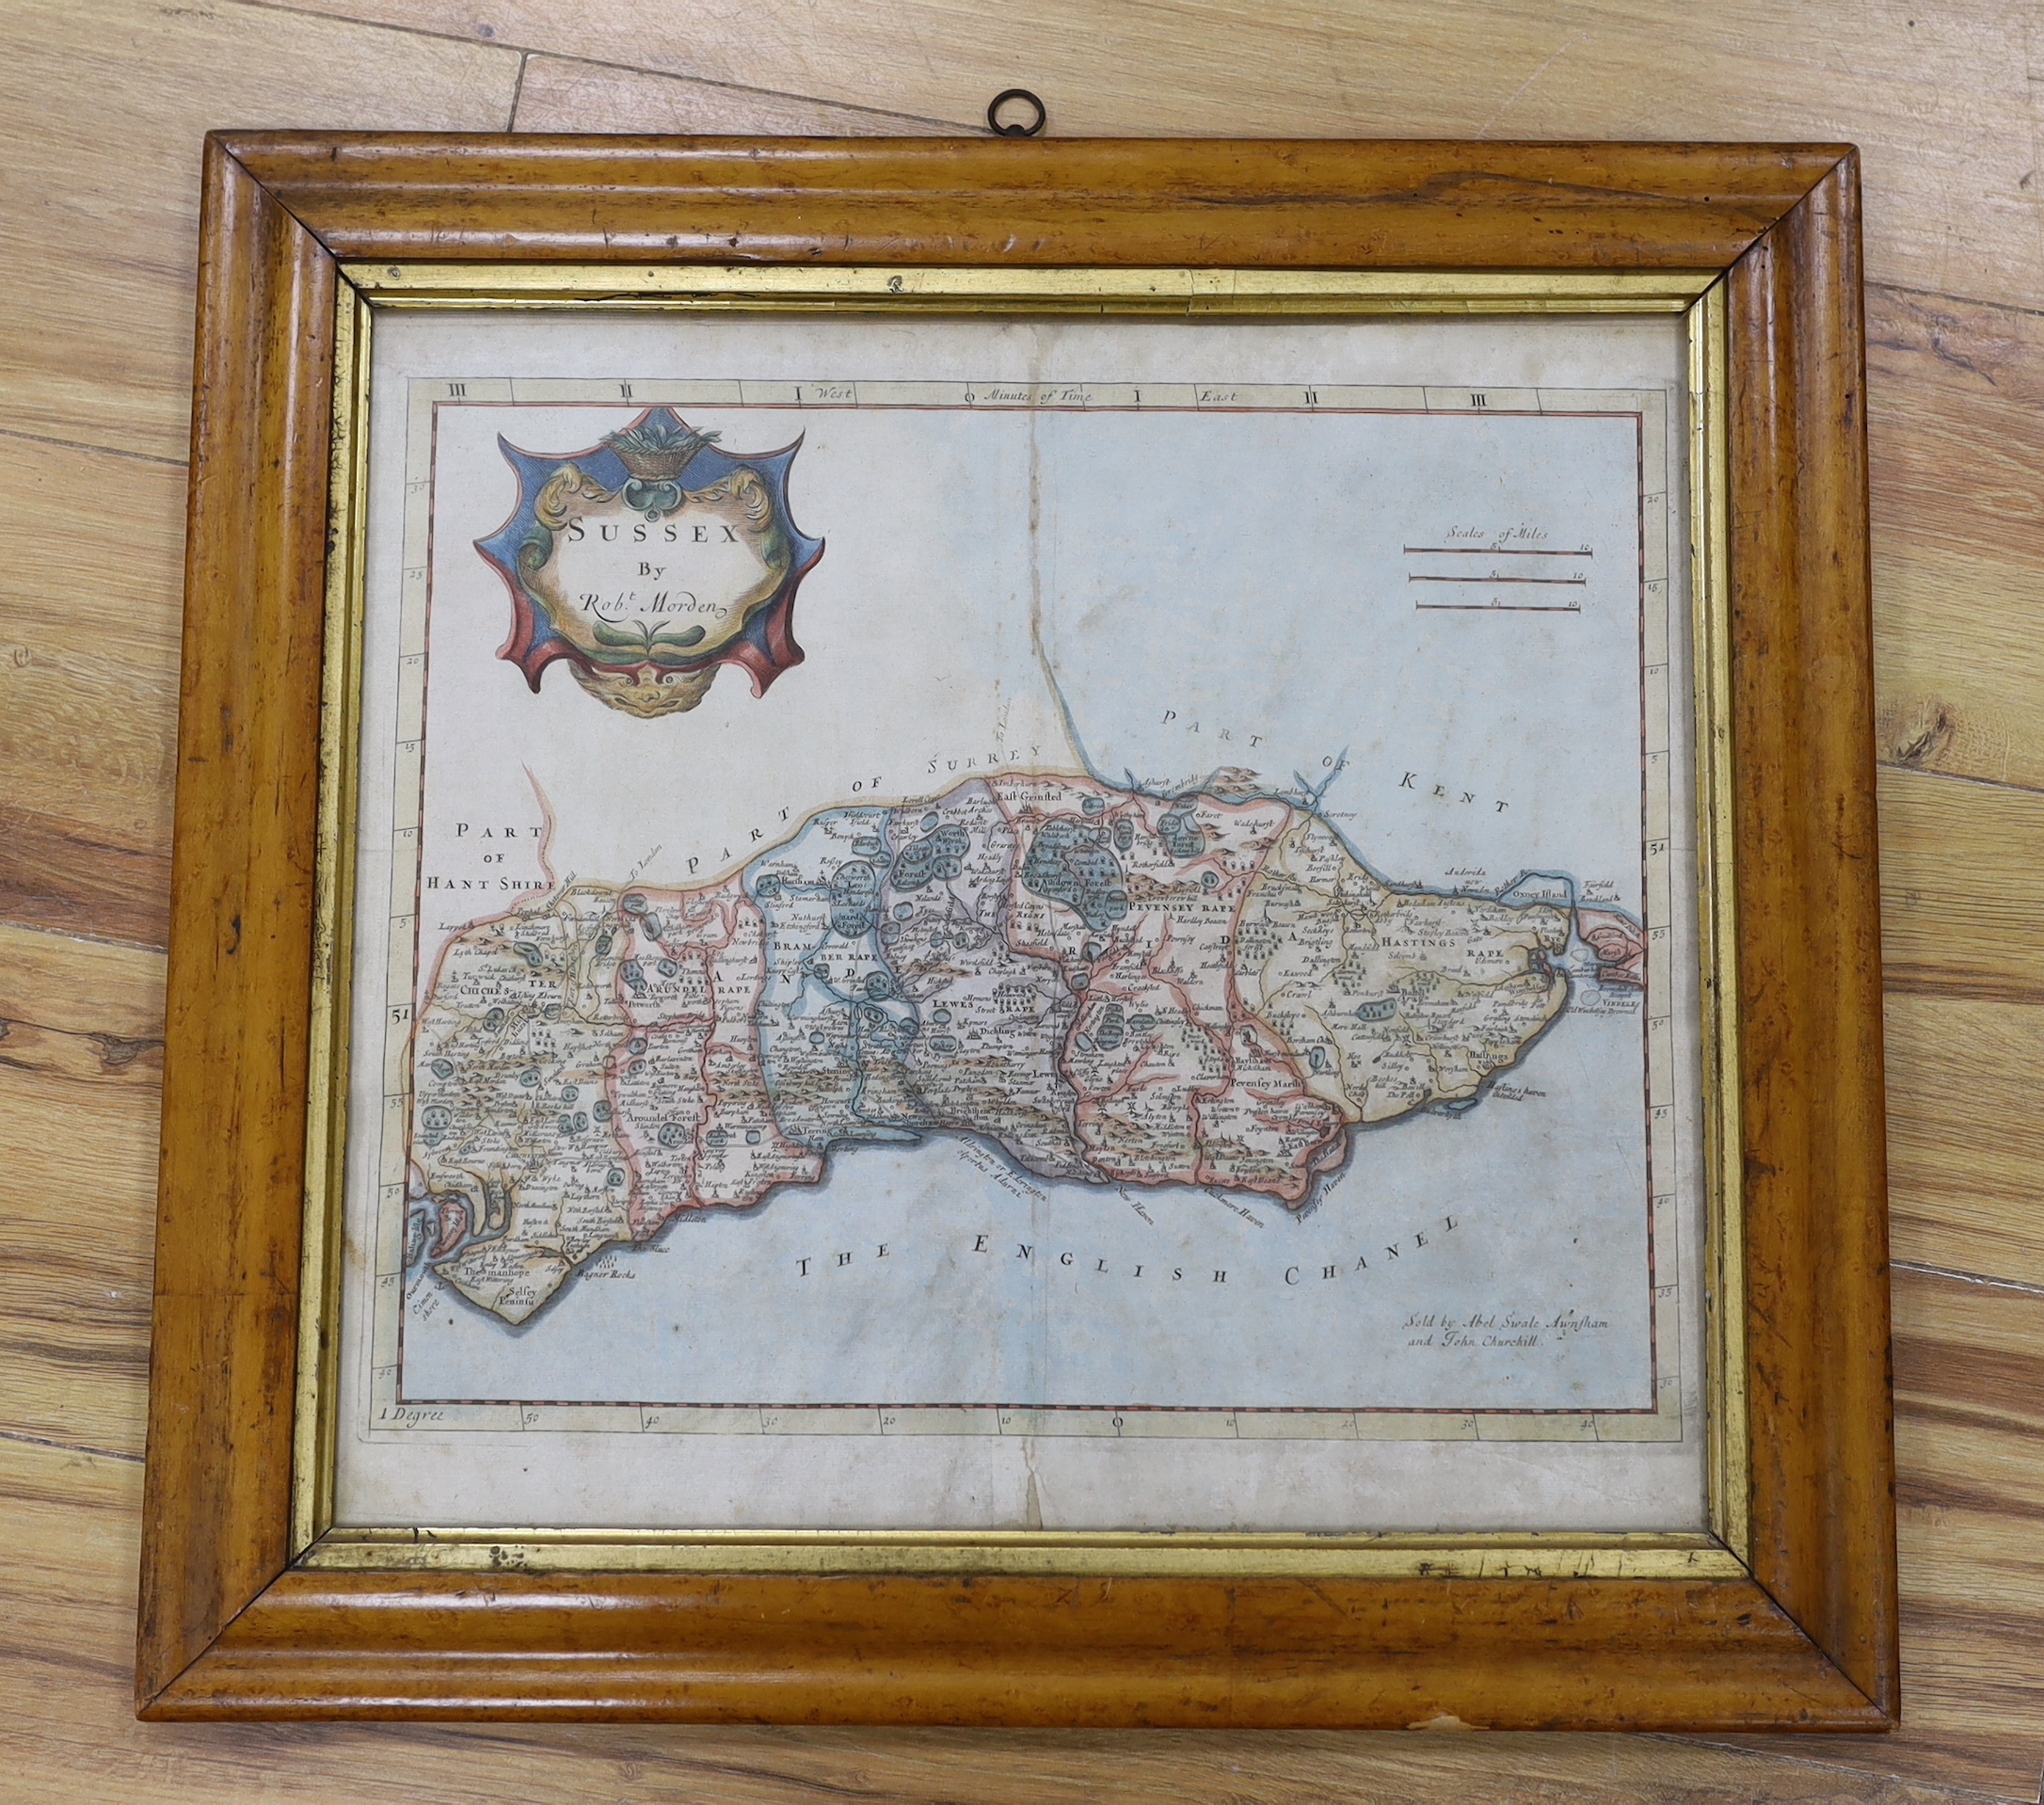 Robert Morden (1650-1703), hand coloured map of Sussex, sold by Abel Swale, Awnshan & John Churchill, 39 x 42.5cm, maple framed